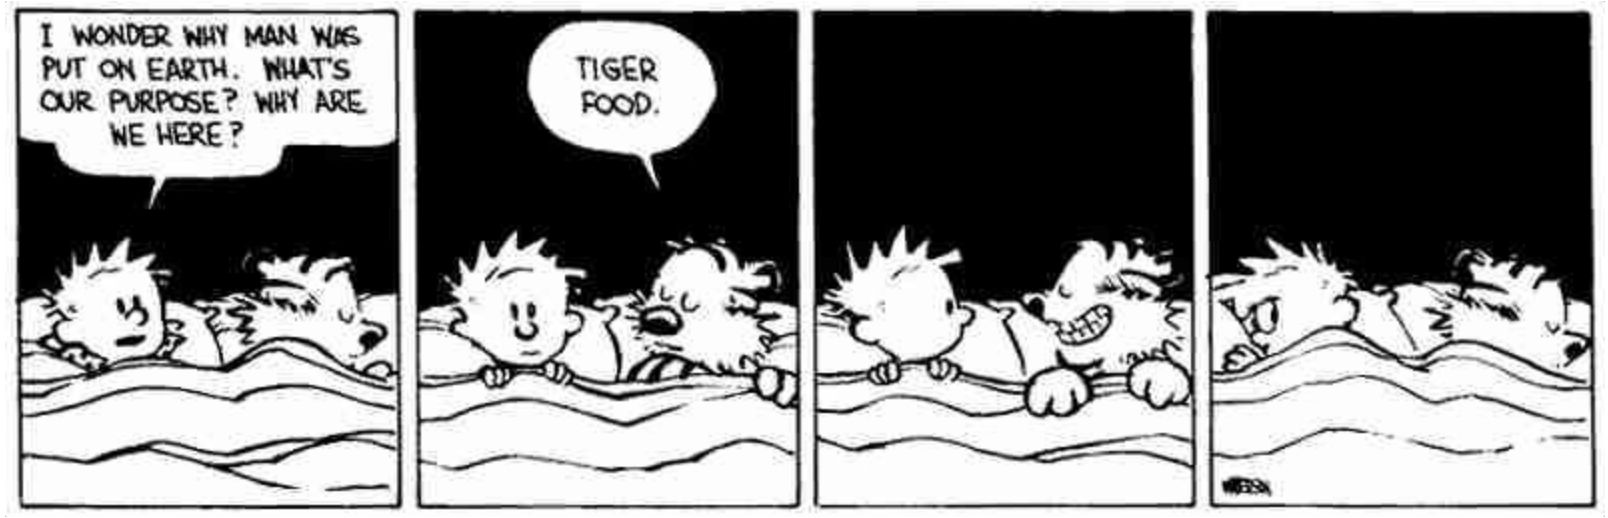 Tiger food in Calvin and Hobbes